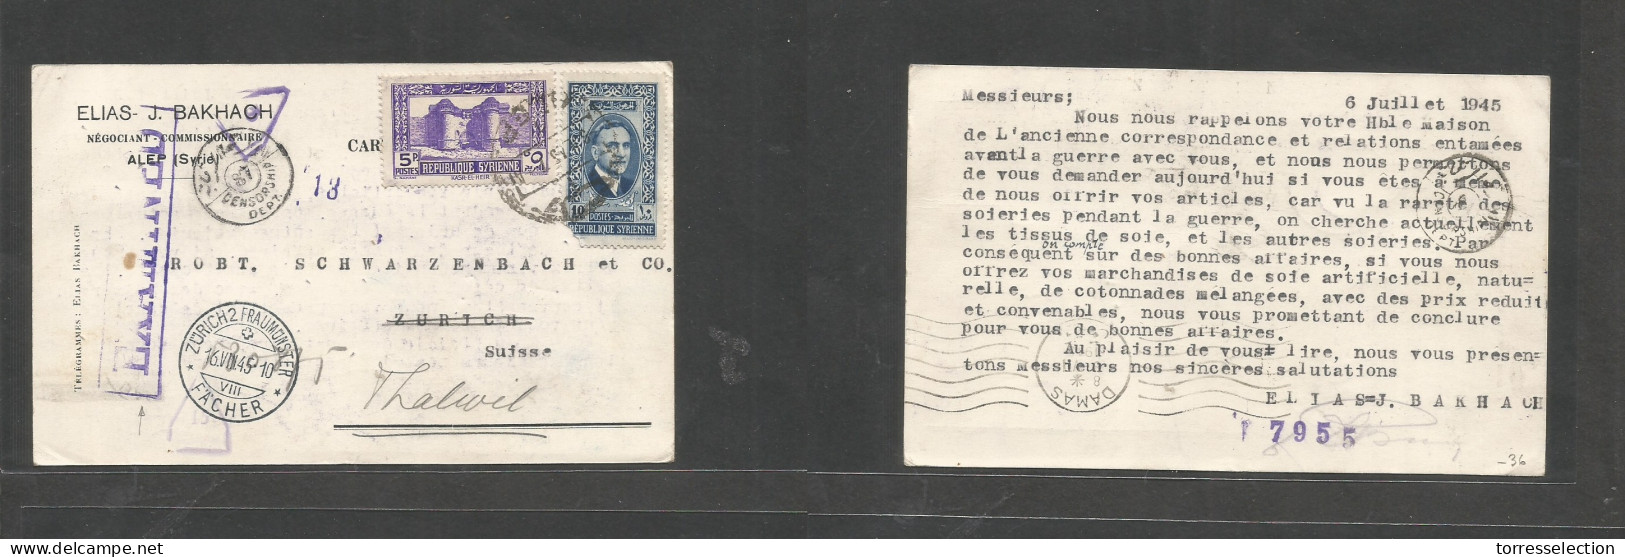 SYRIA. 1945 (5 July) Alep - Switzerland, Thalwil Via Zurich (16 Aug) Comercial Private Multifkd Card At 15p Rate, Cds Wi - Syrien